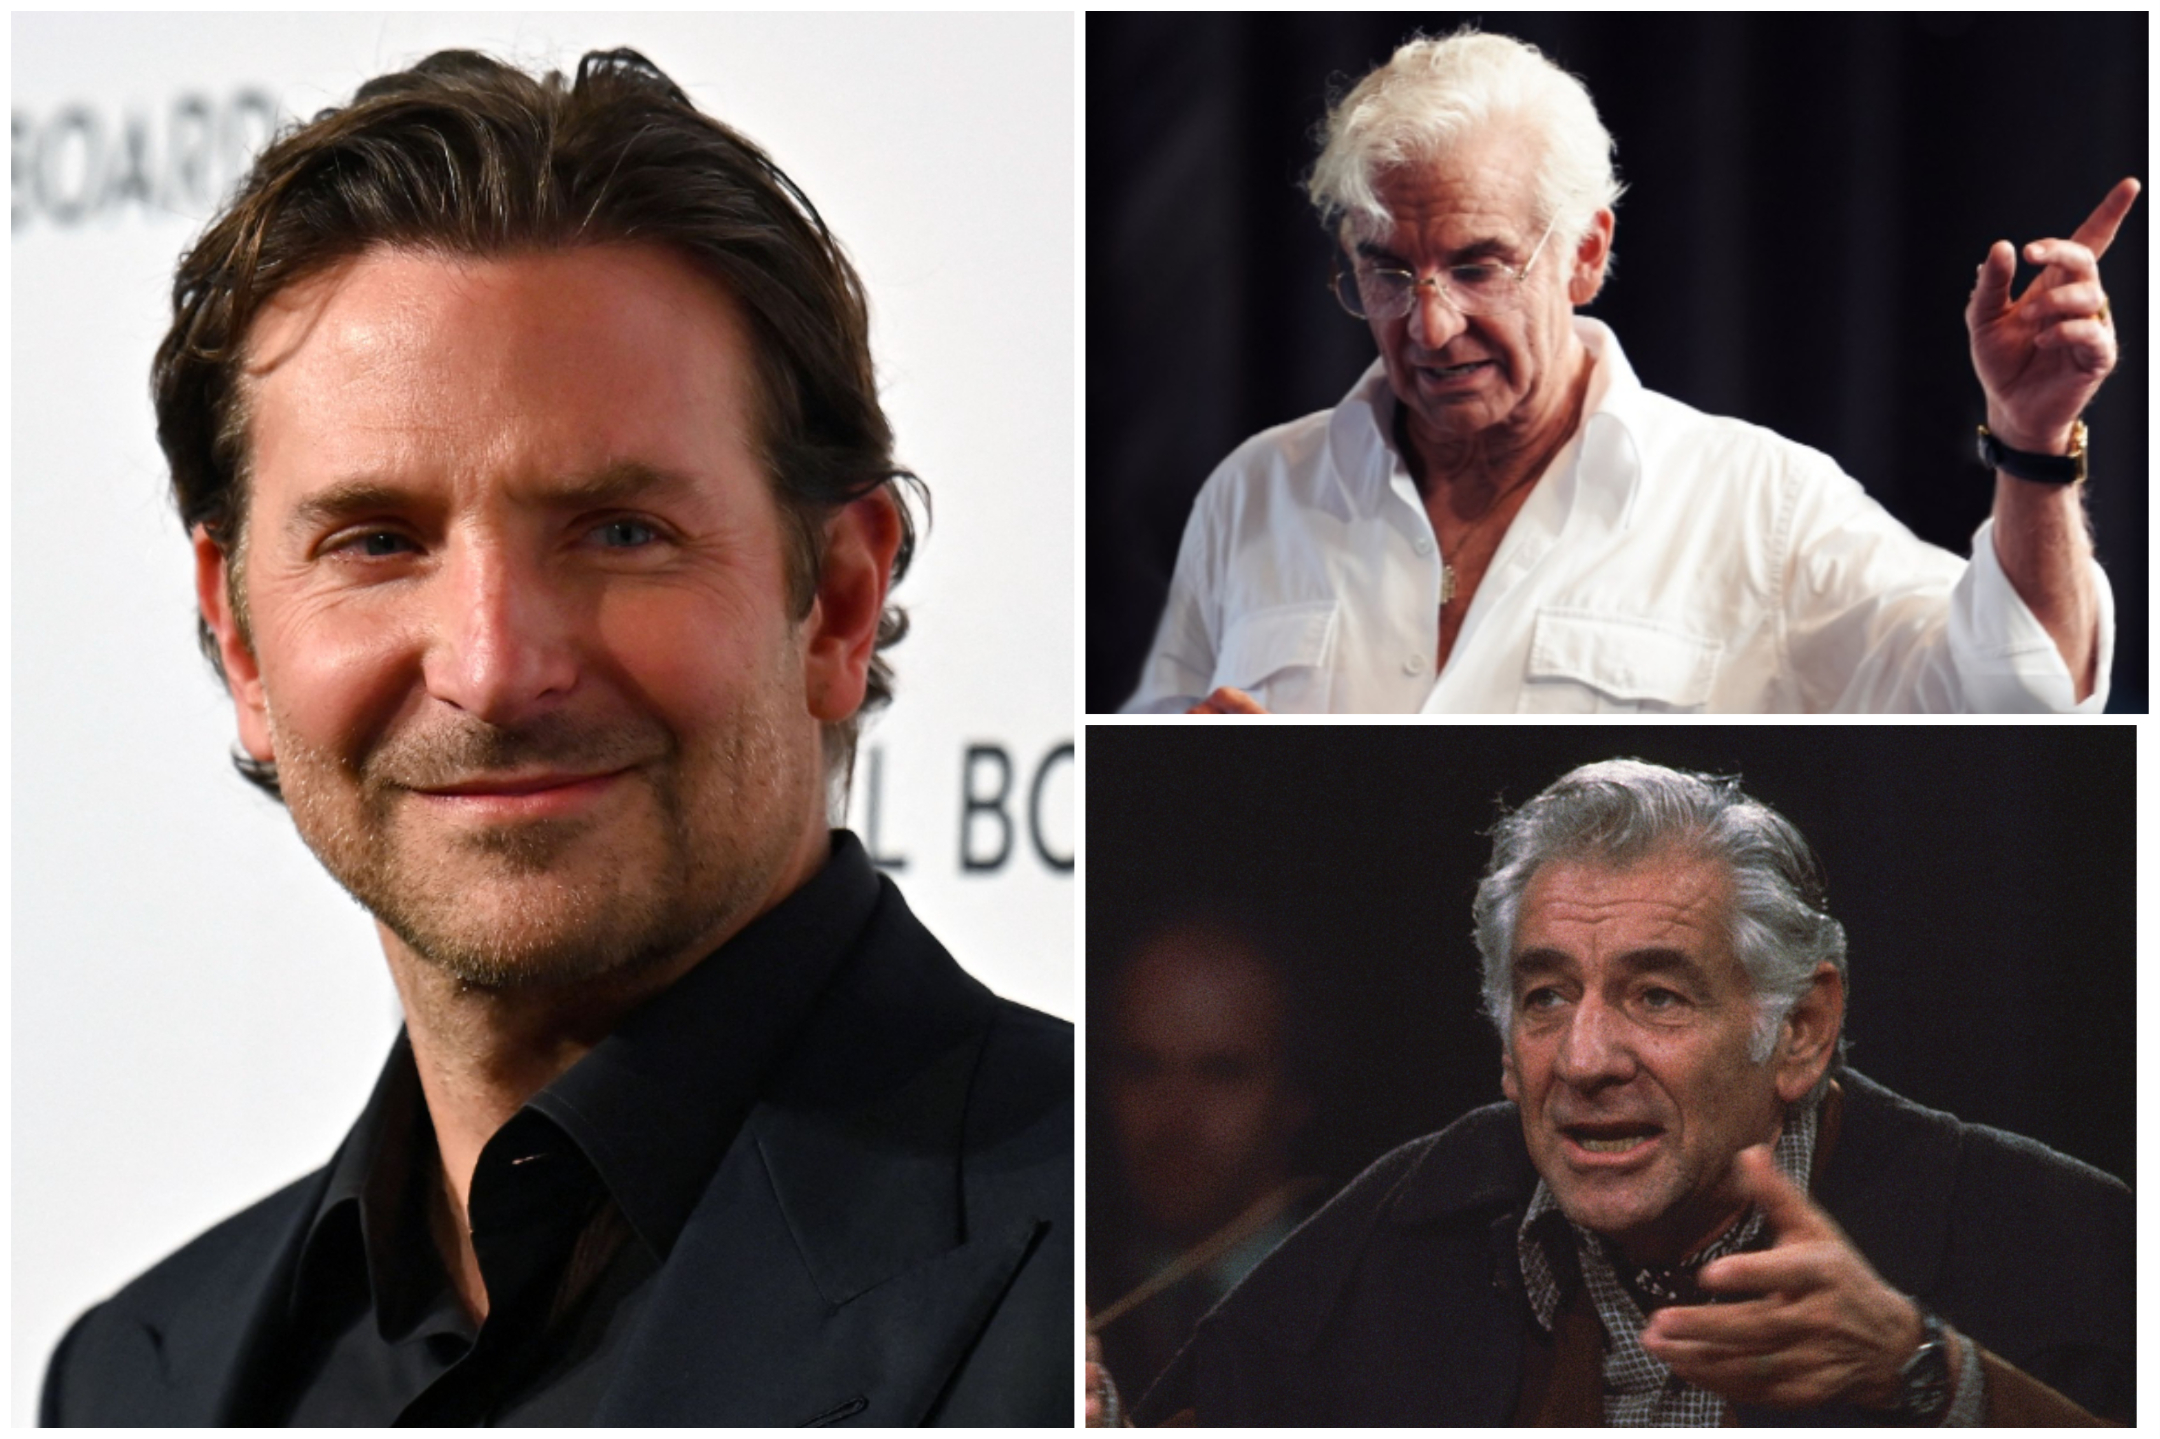 Maestro: Bradley Cooper's 'A Star Is Born' Follow-Up Films in May